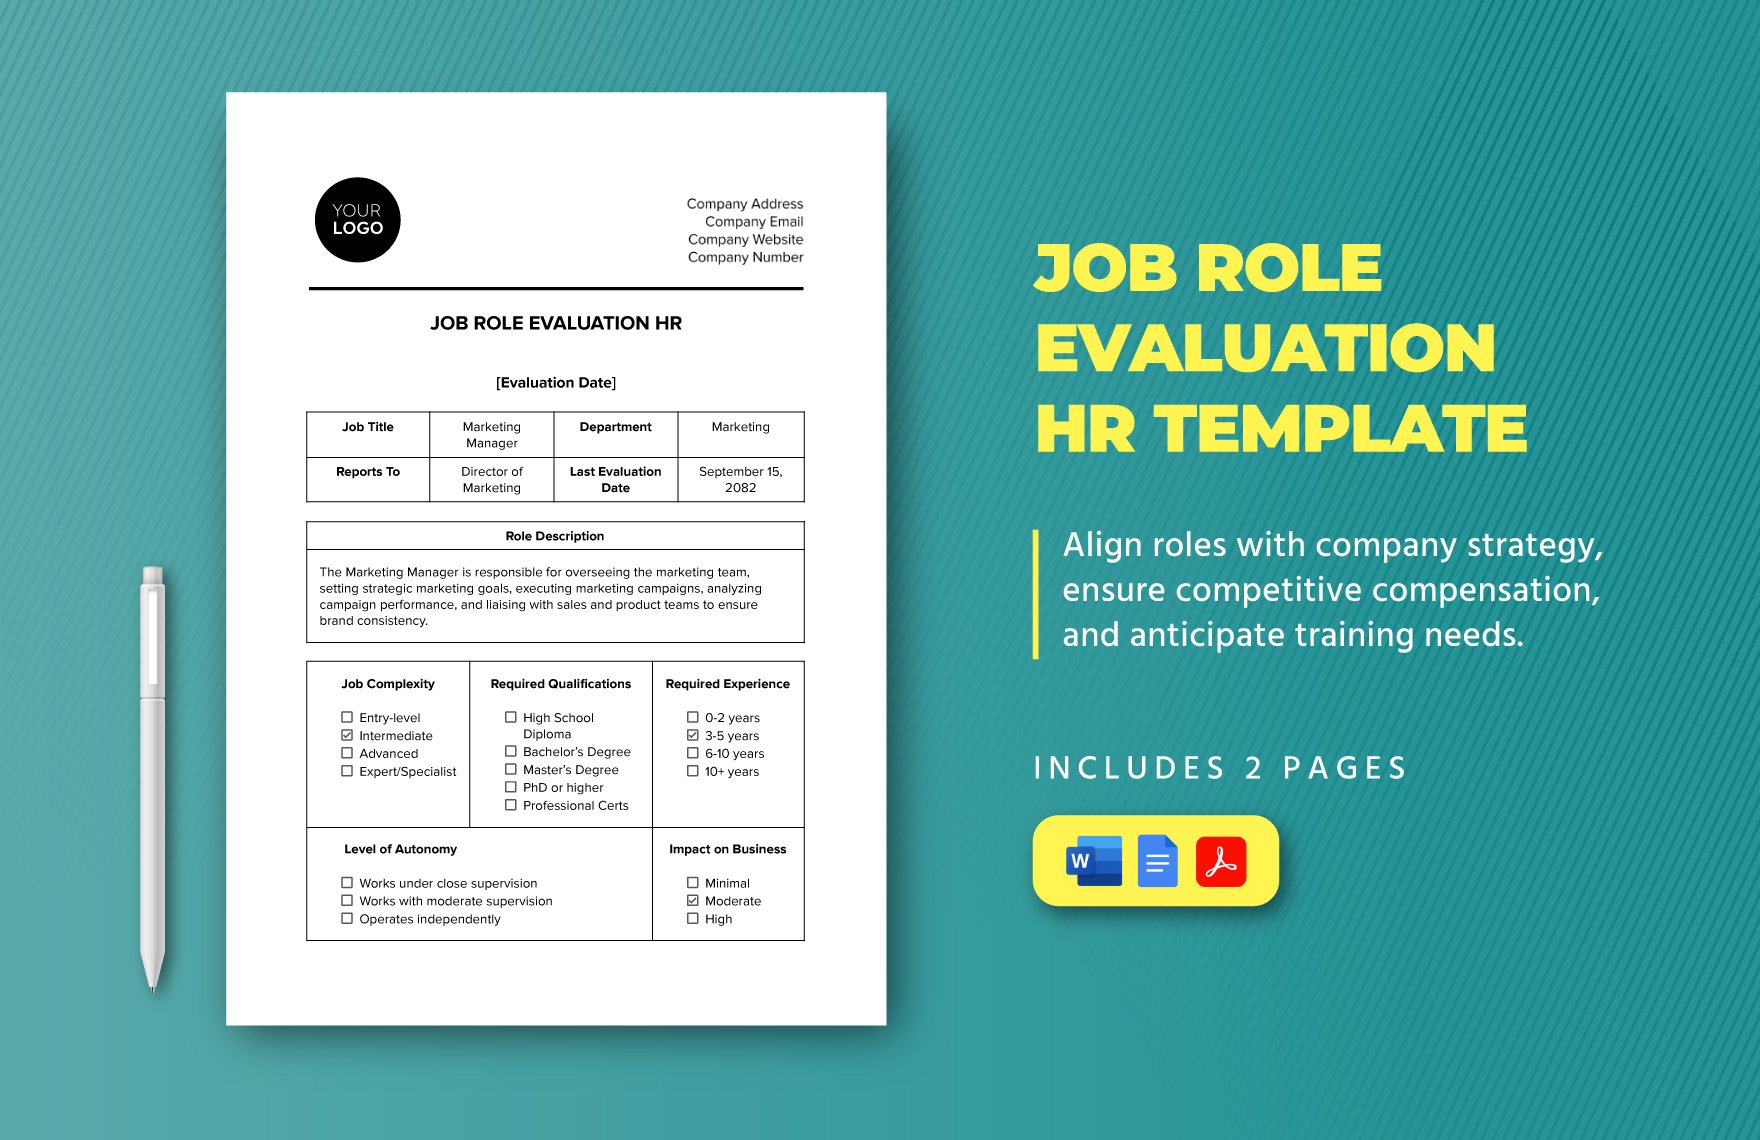 Job Role Evaluation HR Template in Word, Google Docs, PDF